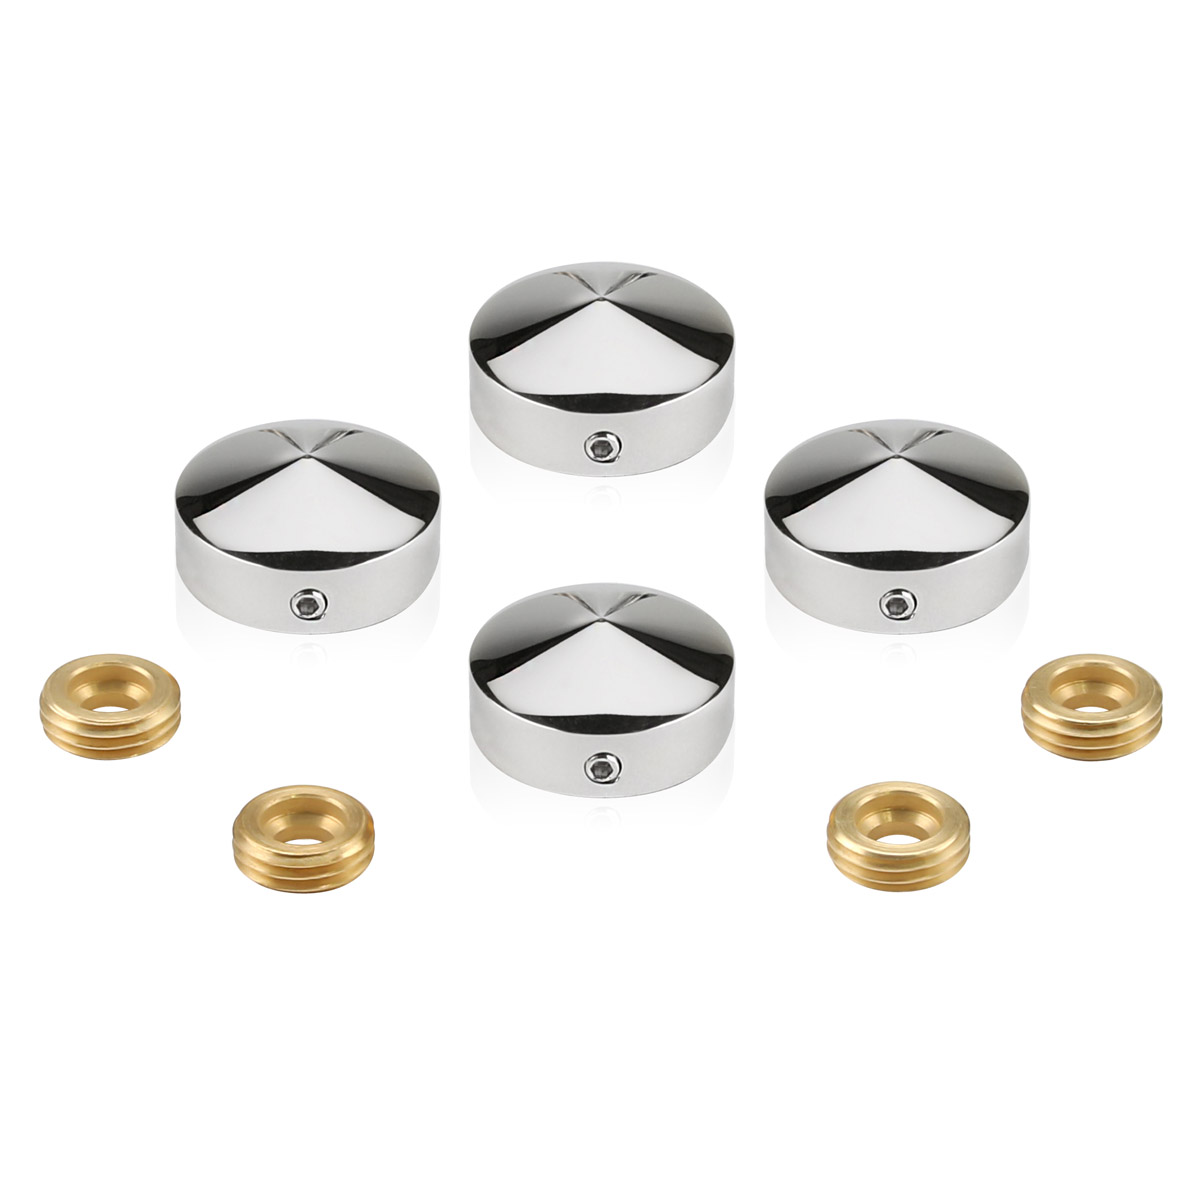 Set of 4 Conical Locking Screw Cover Diameter 13/16'', Polished Stainless Steel Finish (Indoor Use Only)